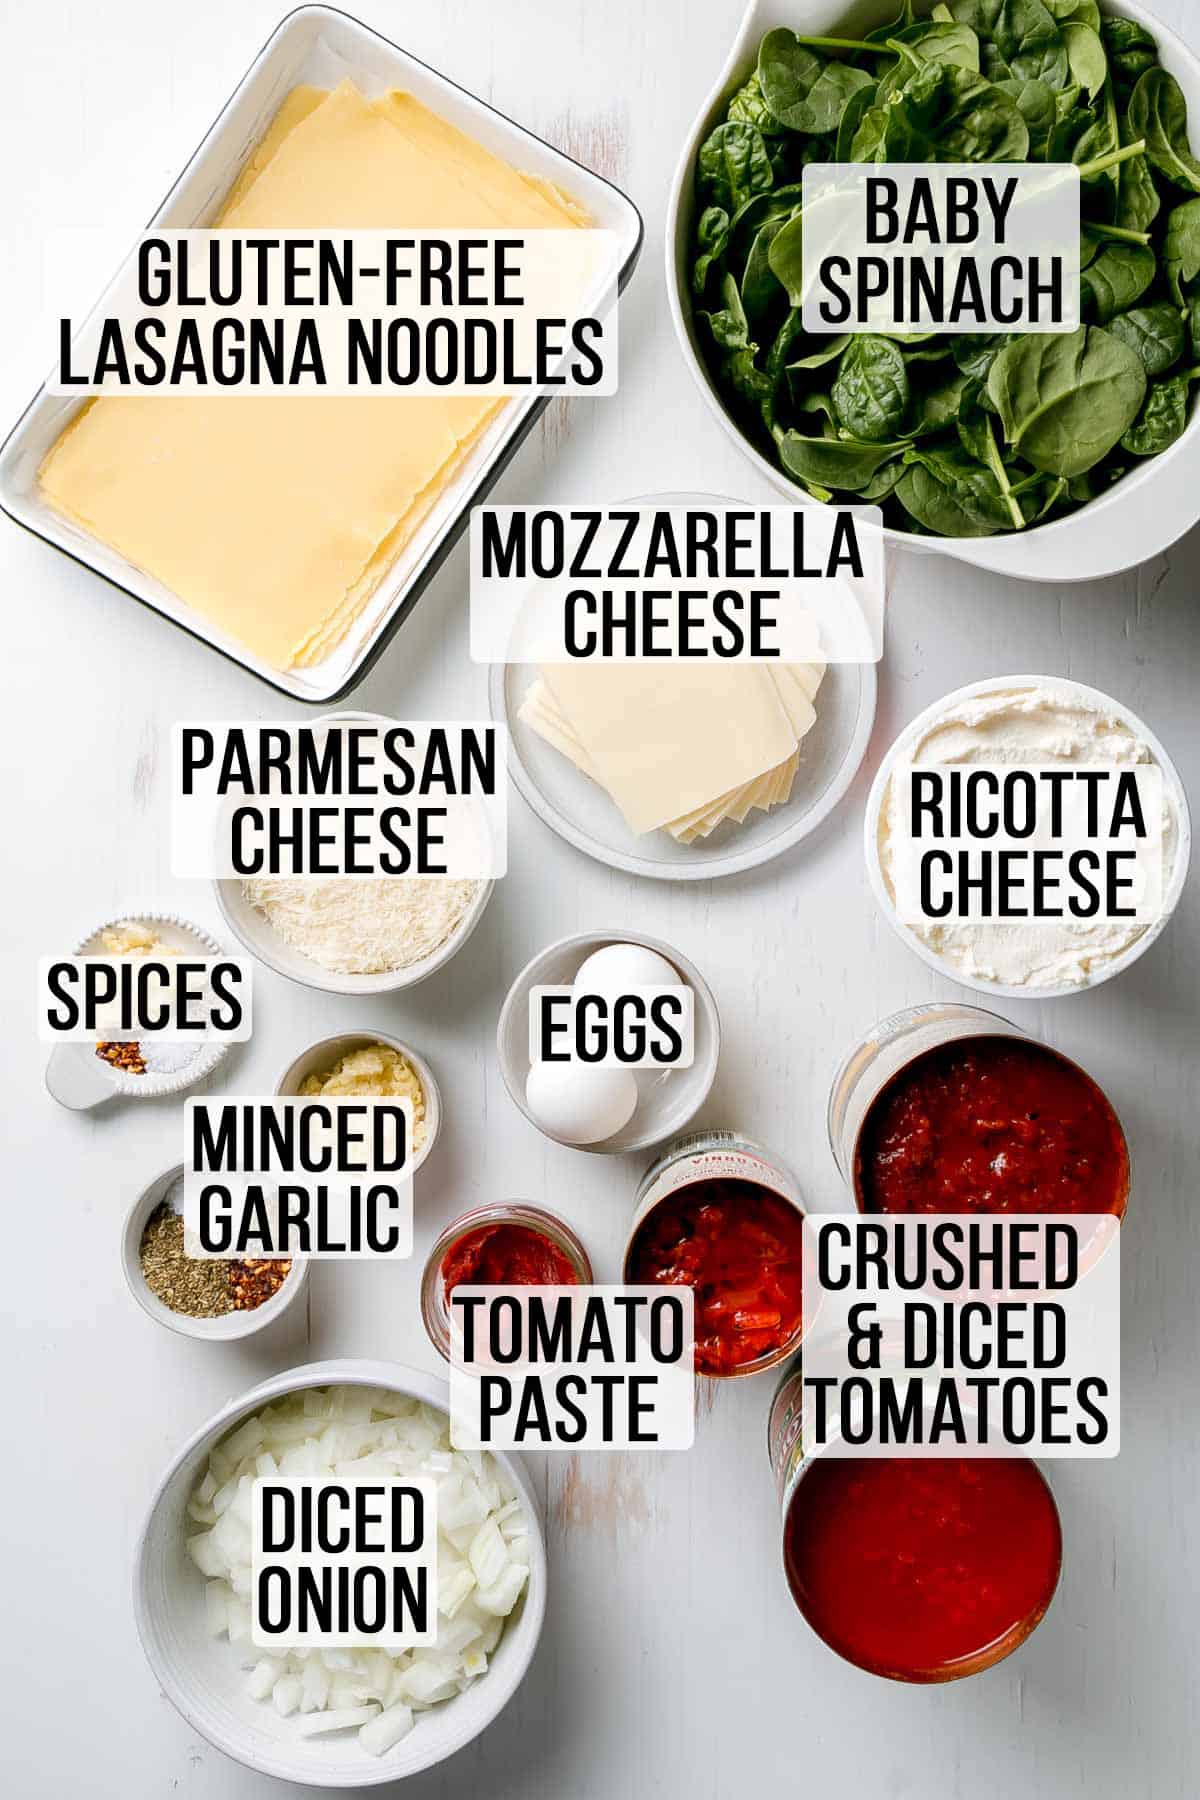 Ingredients for gluten-free vegetarian lasagna measured out in bowls.